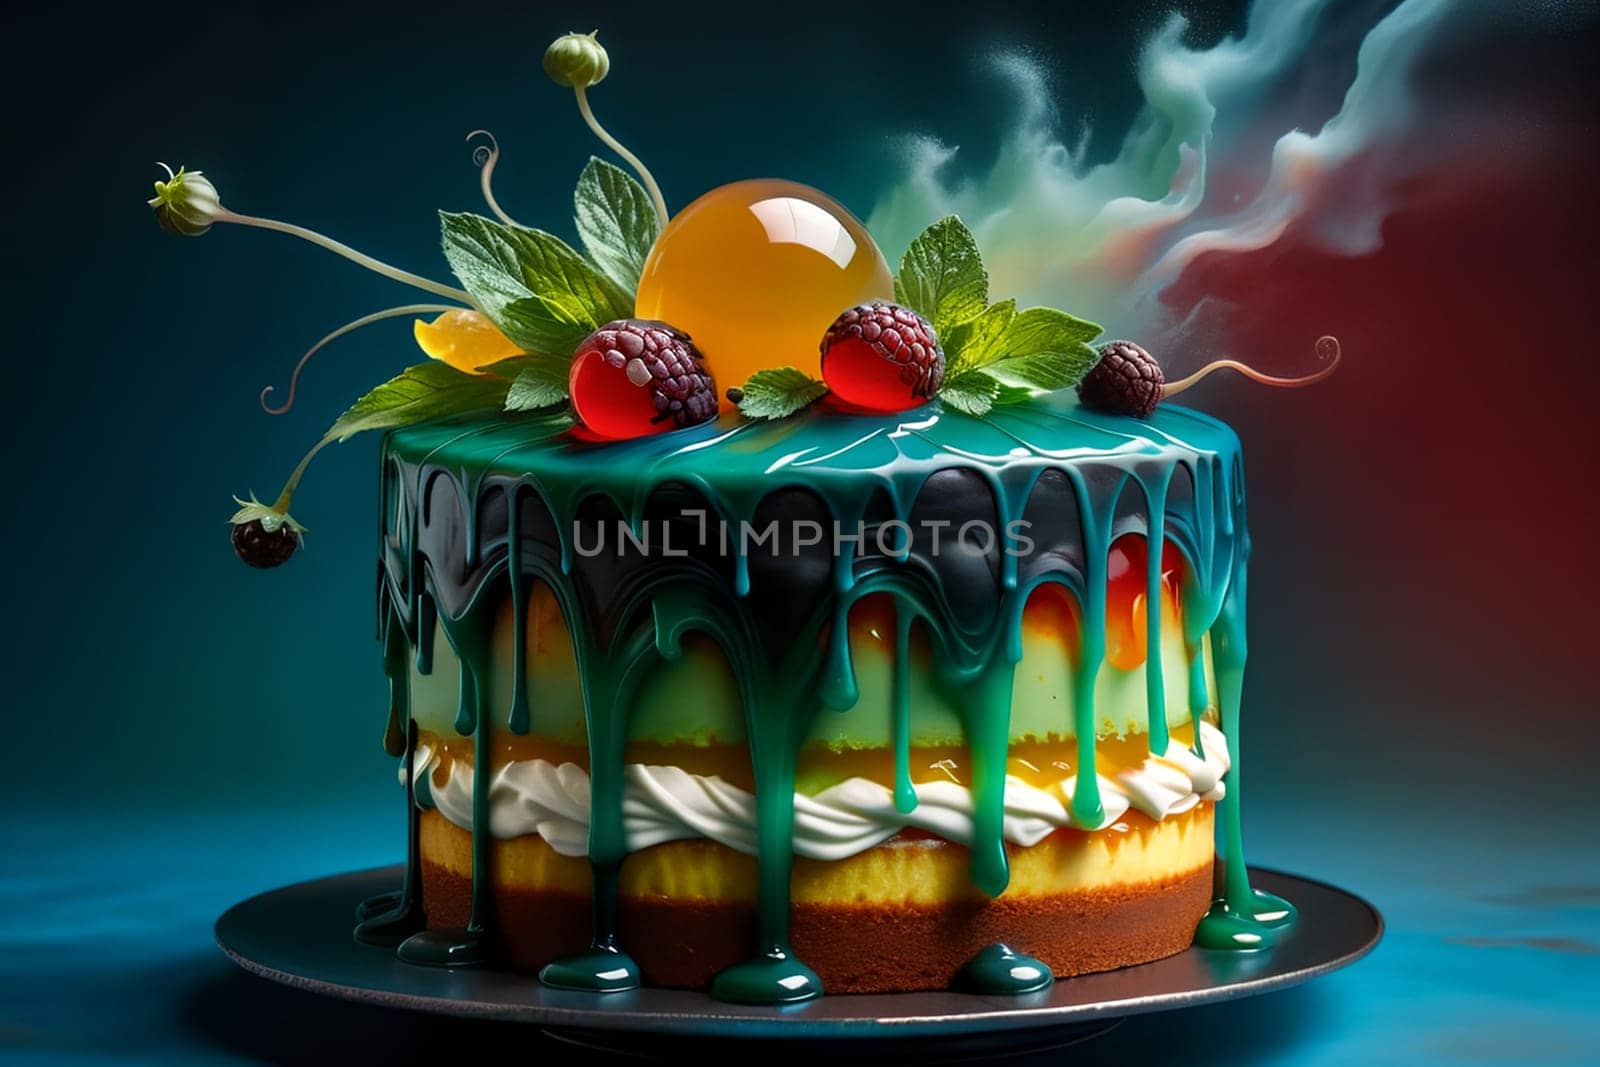 fruit cake with syrup, cream and fruits on a green background. by Rawlik